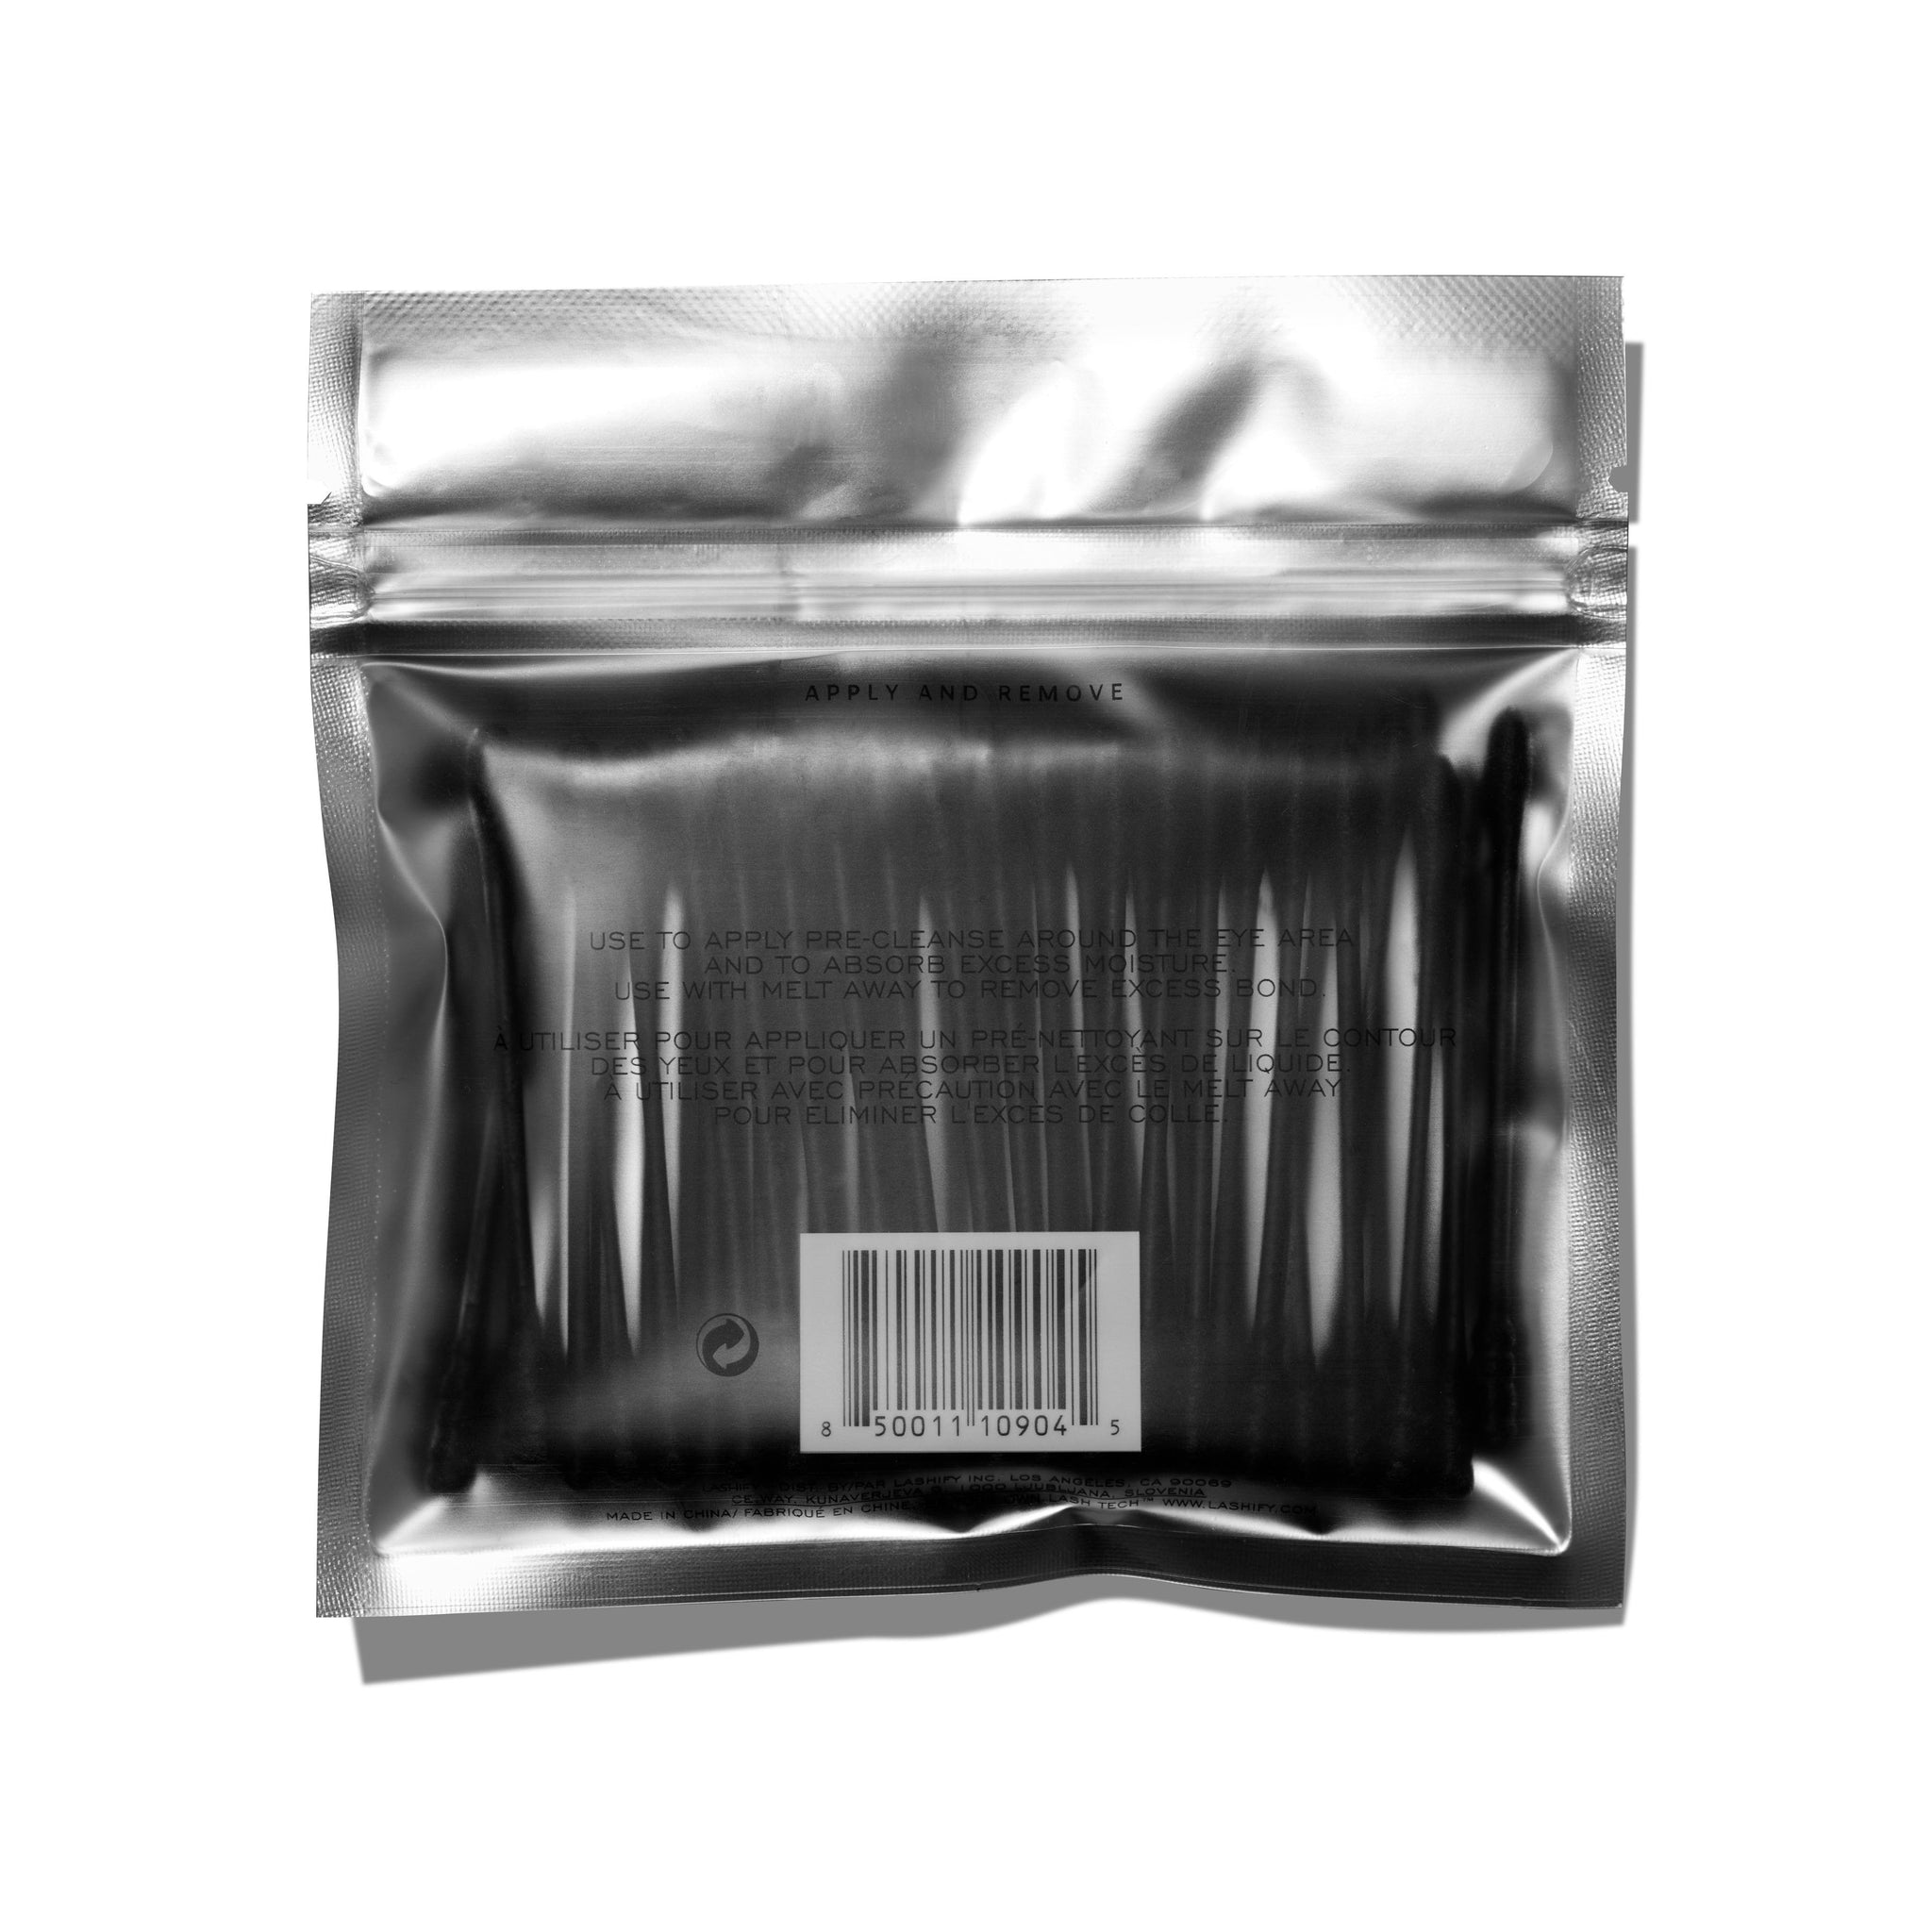 Charcoal Cotton Swabs [hover]